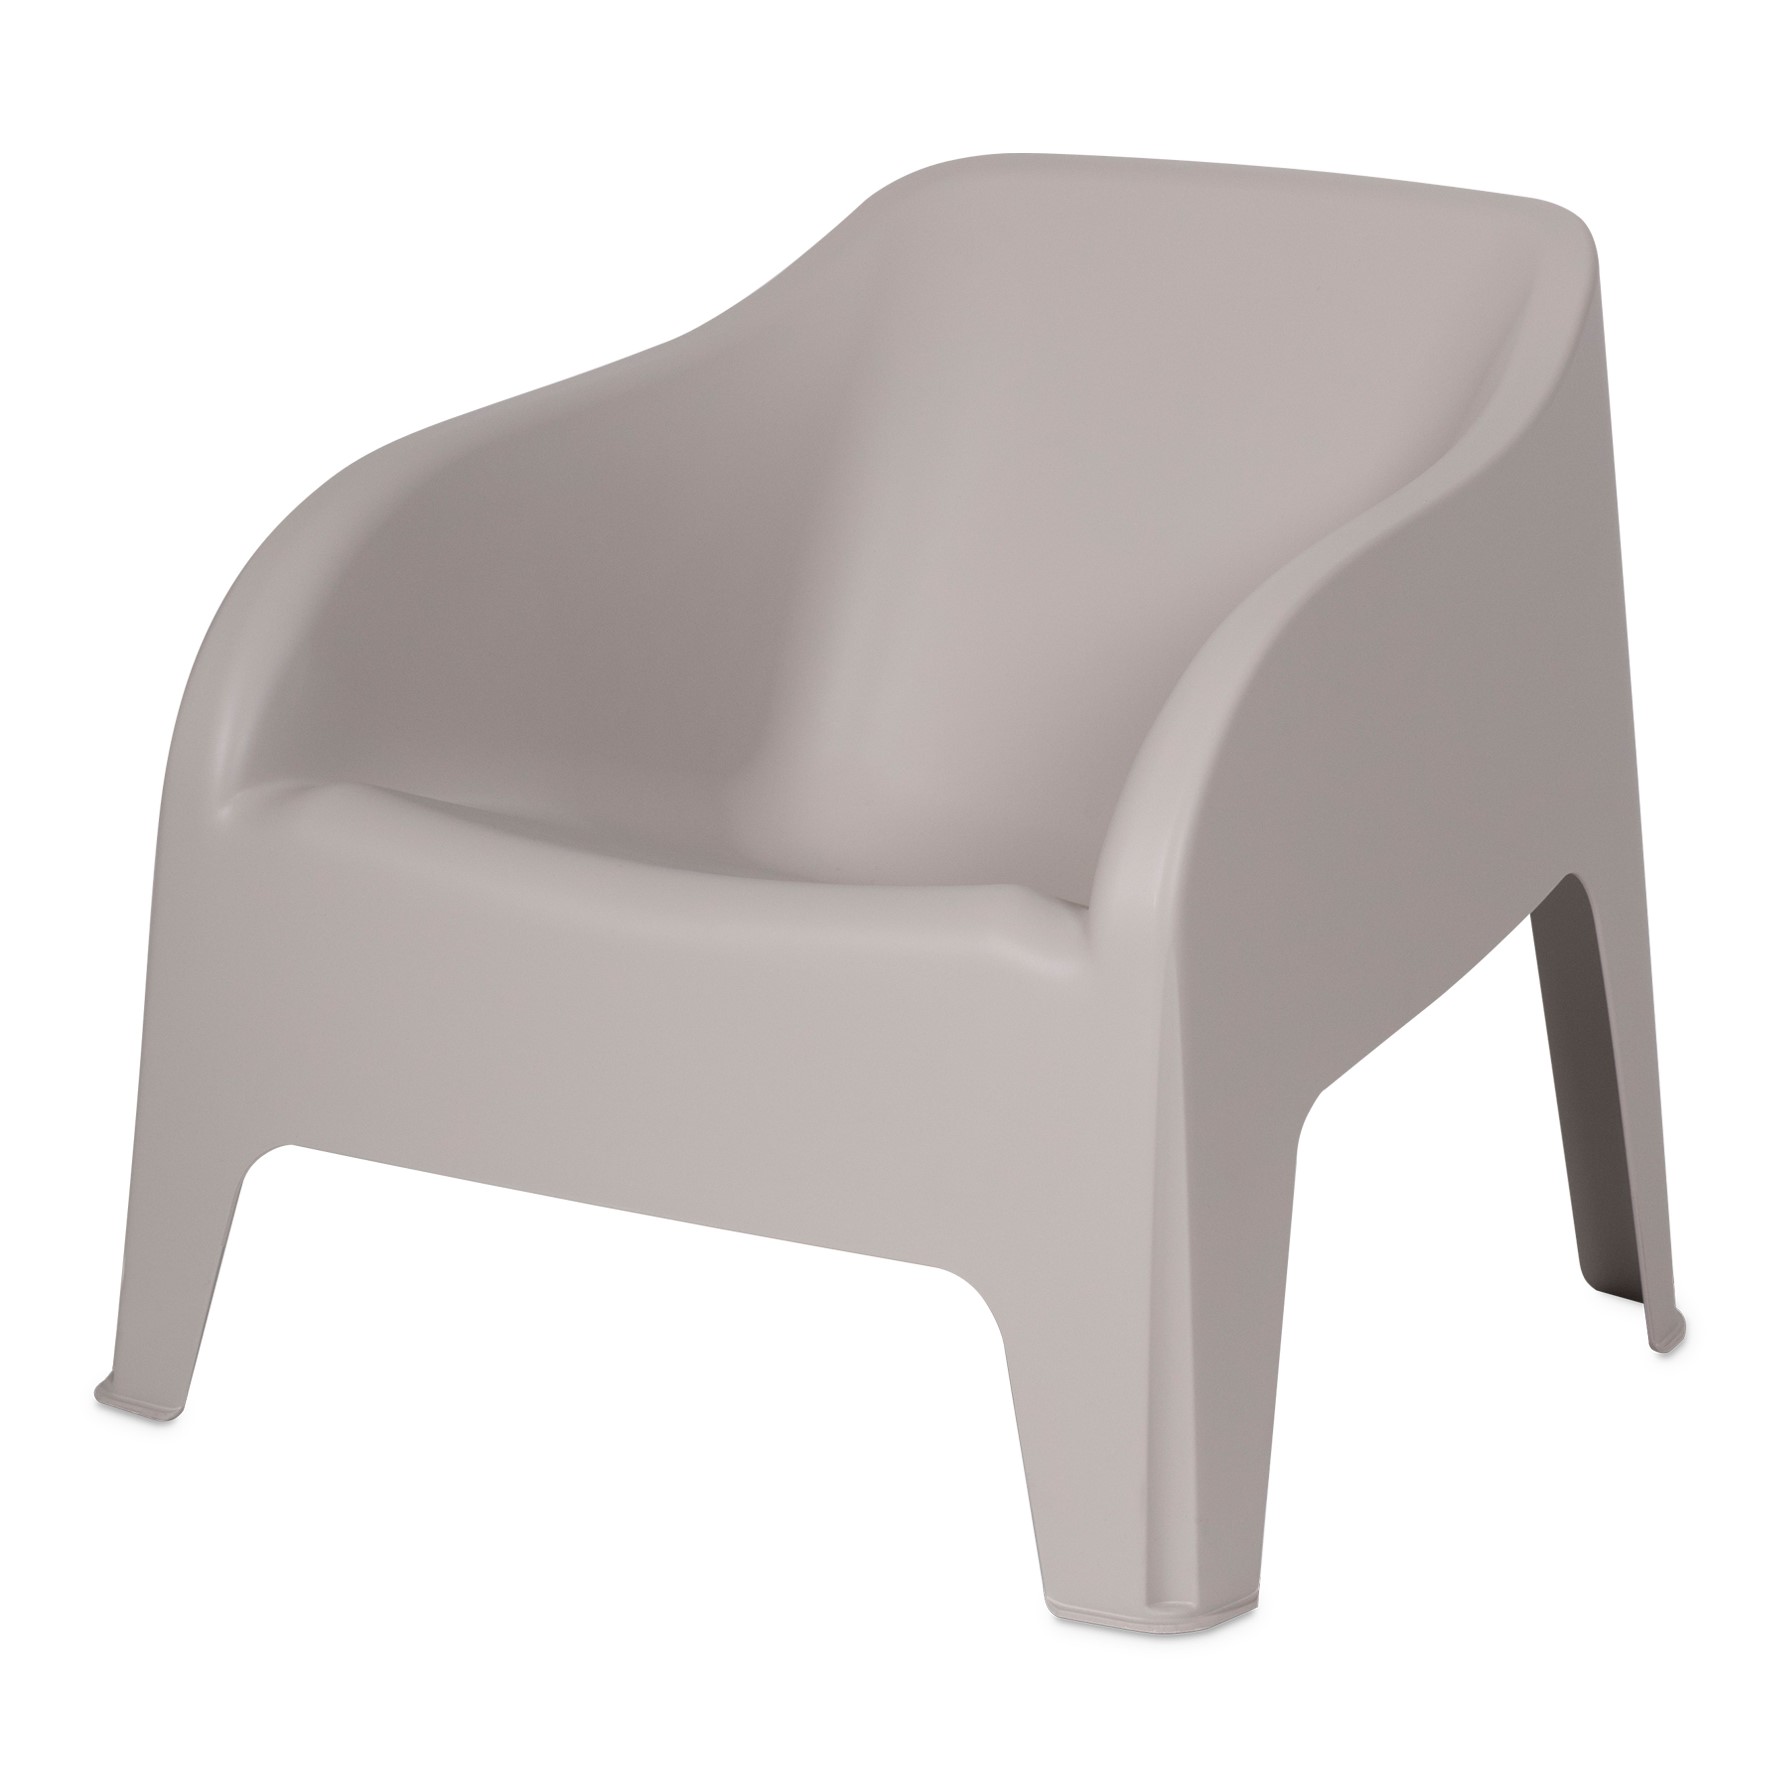 PETRA CHAIR TAUPE